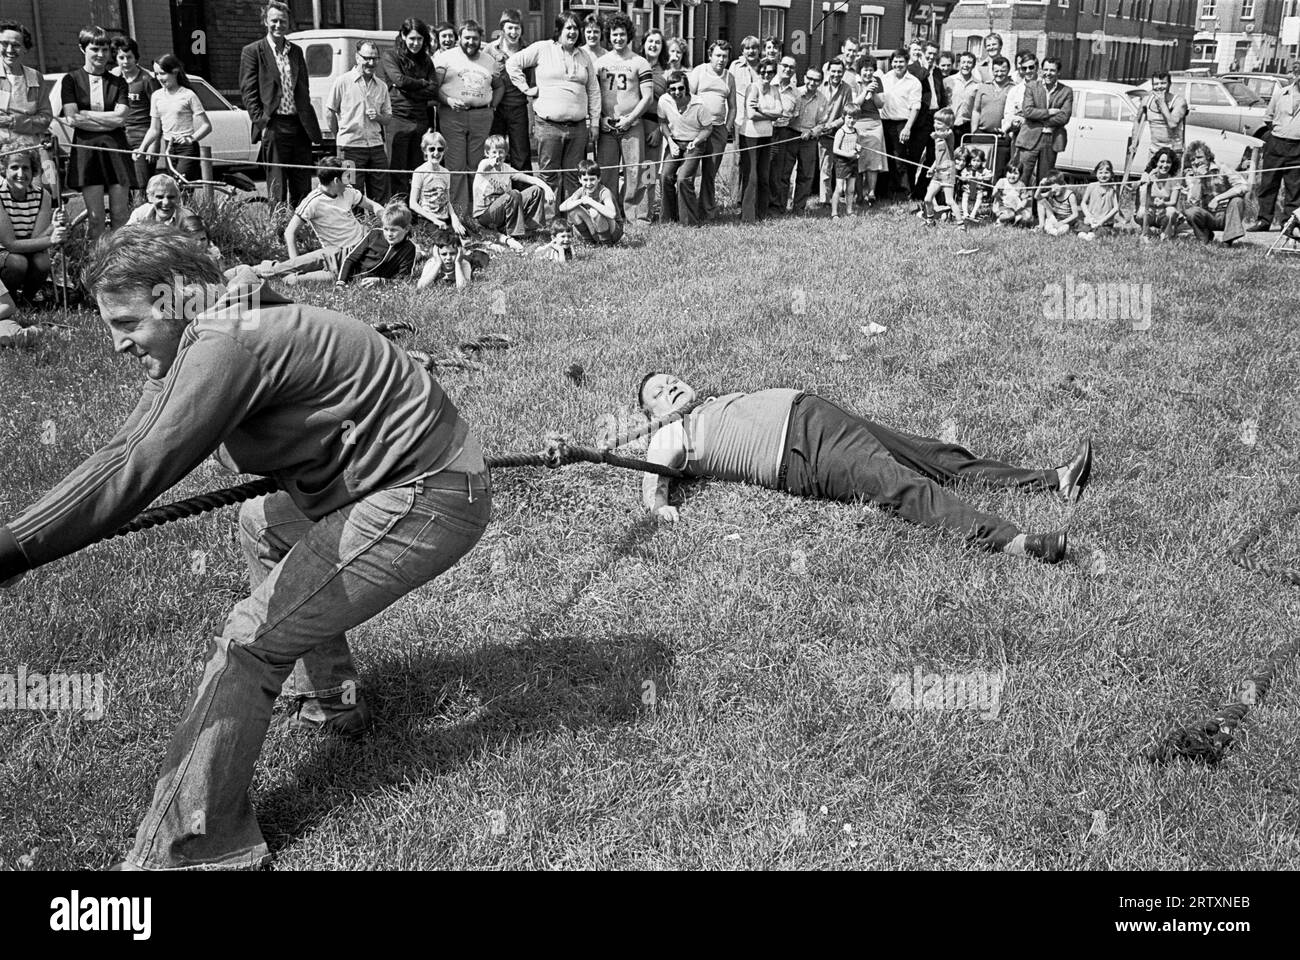 Bank Holiday Tug of war competition, Pill, Newport, 1978 Banque D'Images